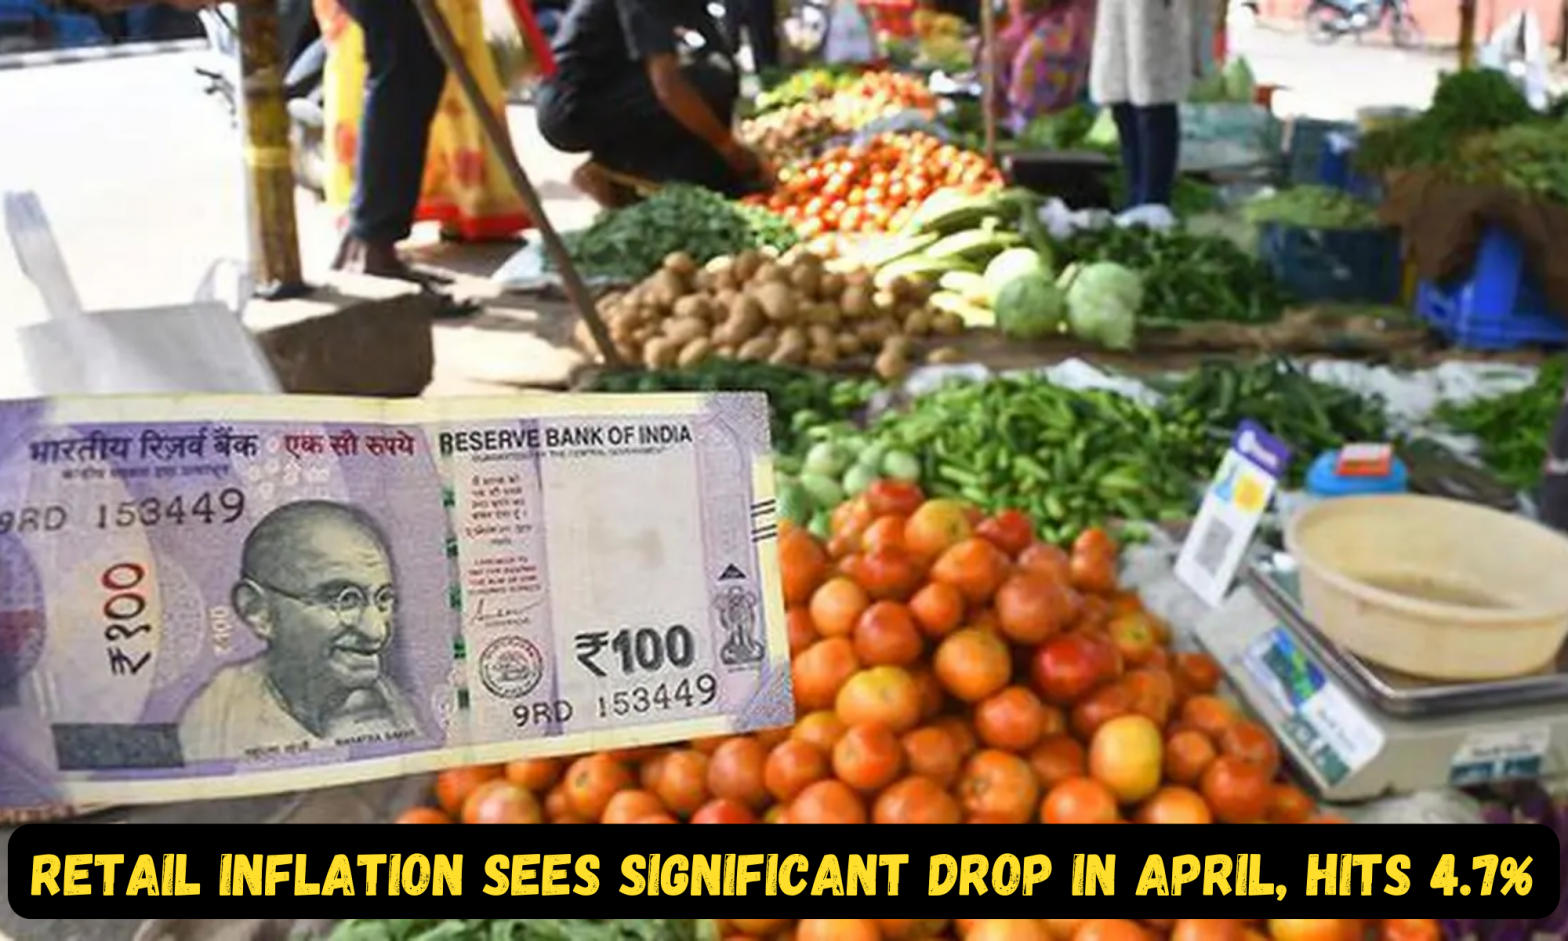 Retail Inflation Sees Significant Drop in April, Hits 4.7%